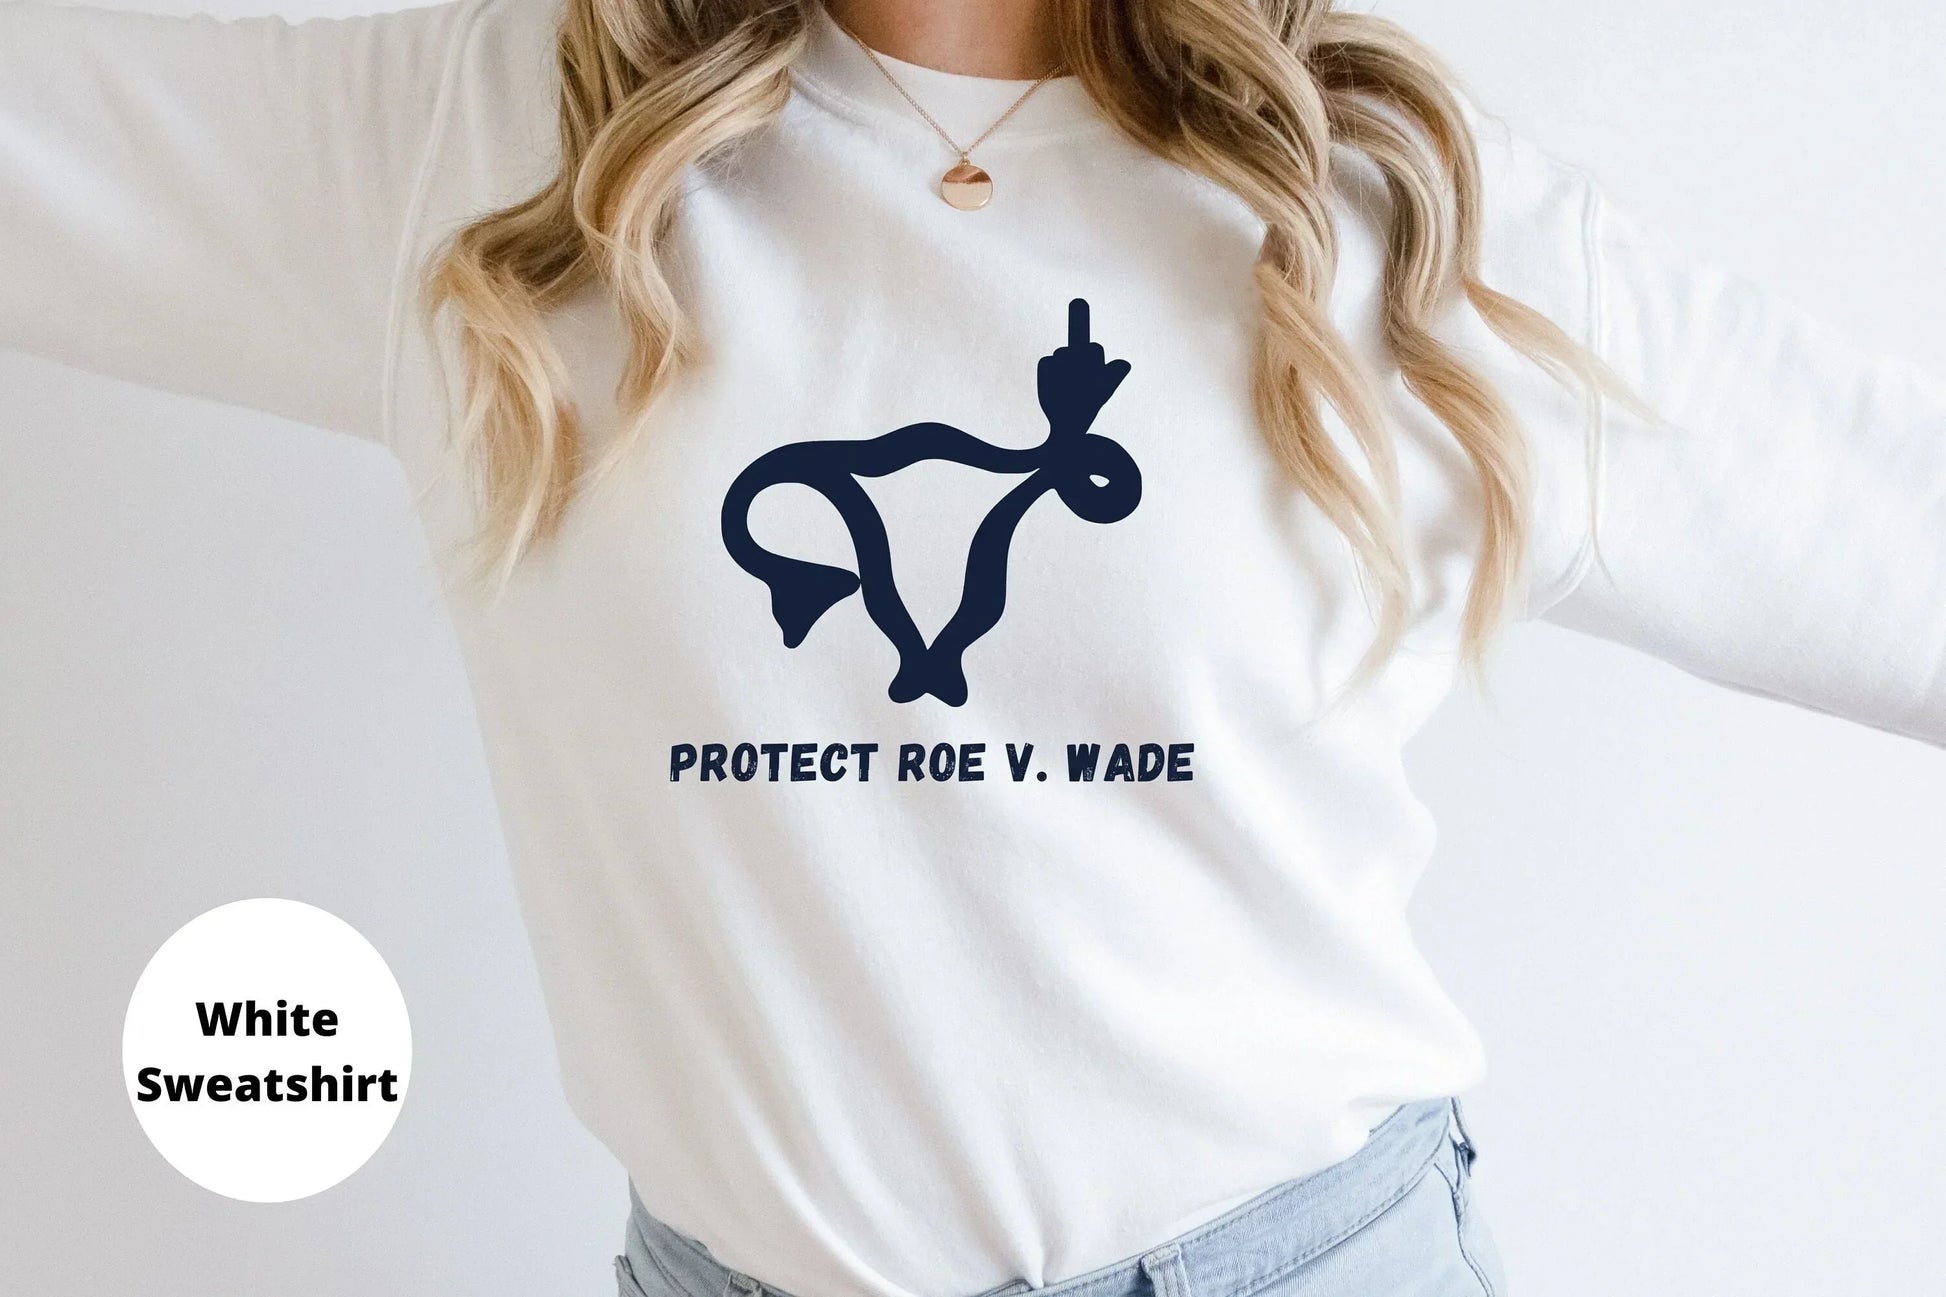 Protect Roe v Wade, My body My Choice T-shirt, Protest, Uterus Women Rights, Pro Choice Shirt, Activist, Equality Sweatshirt,Feminist Hoodie